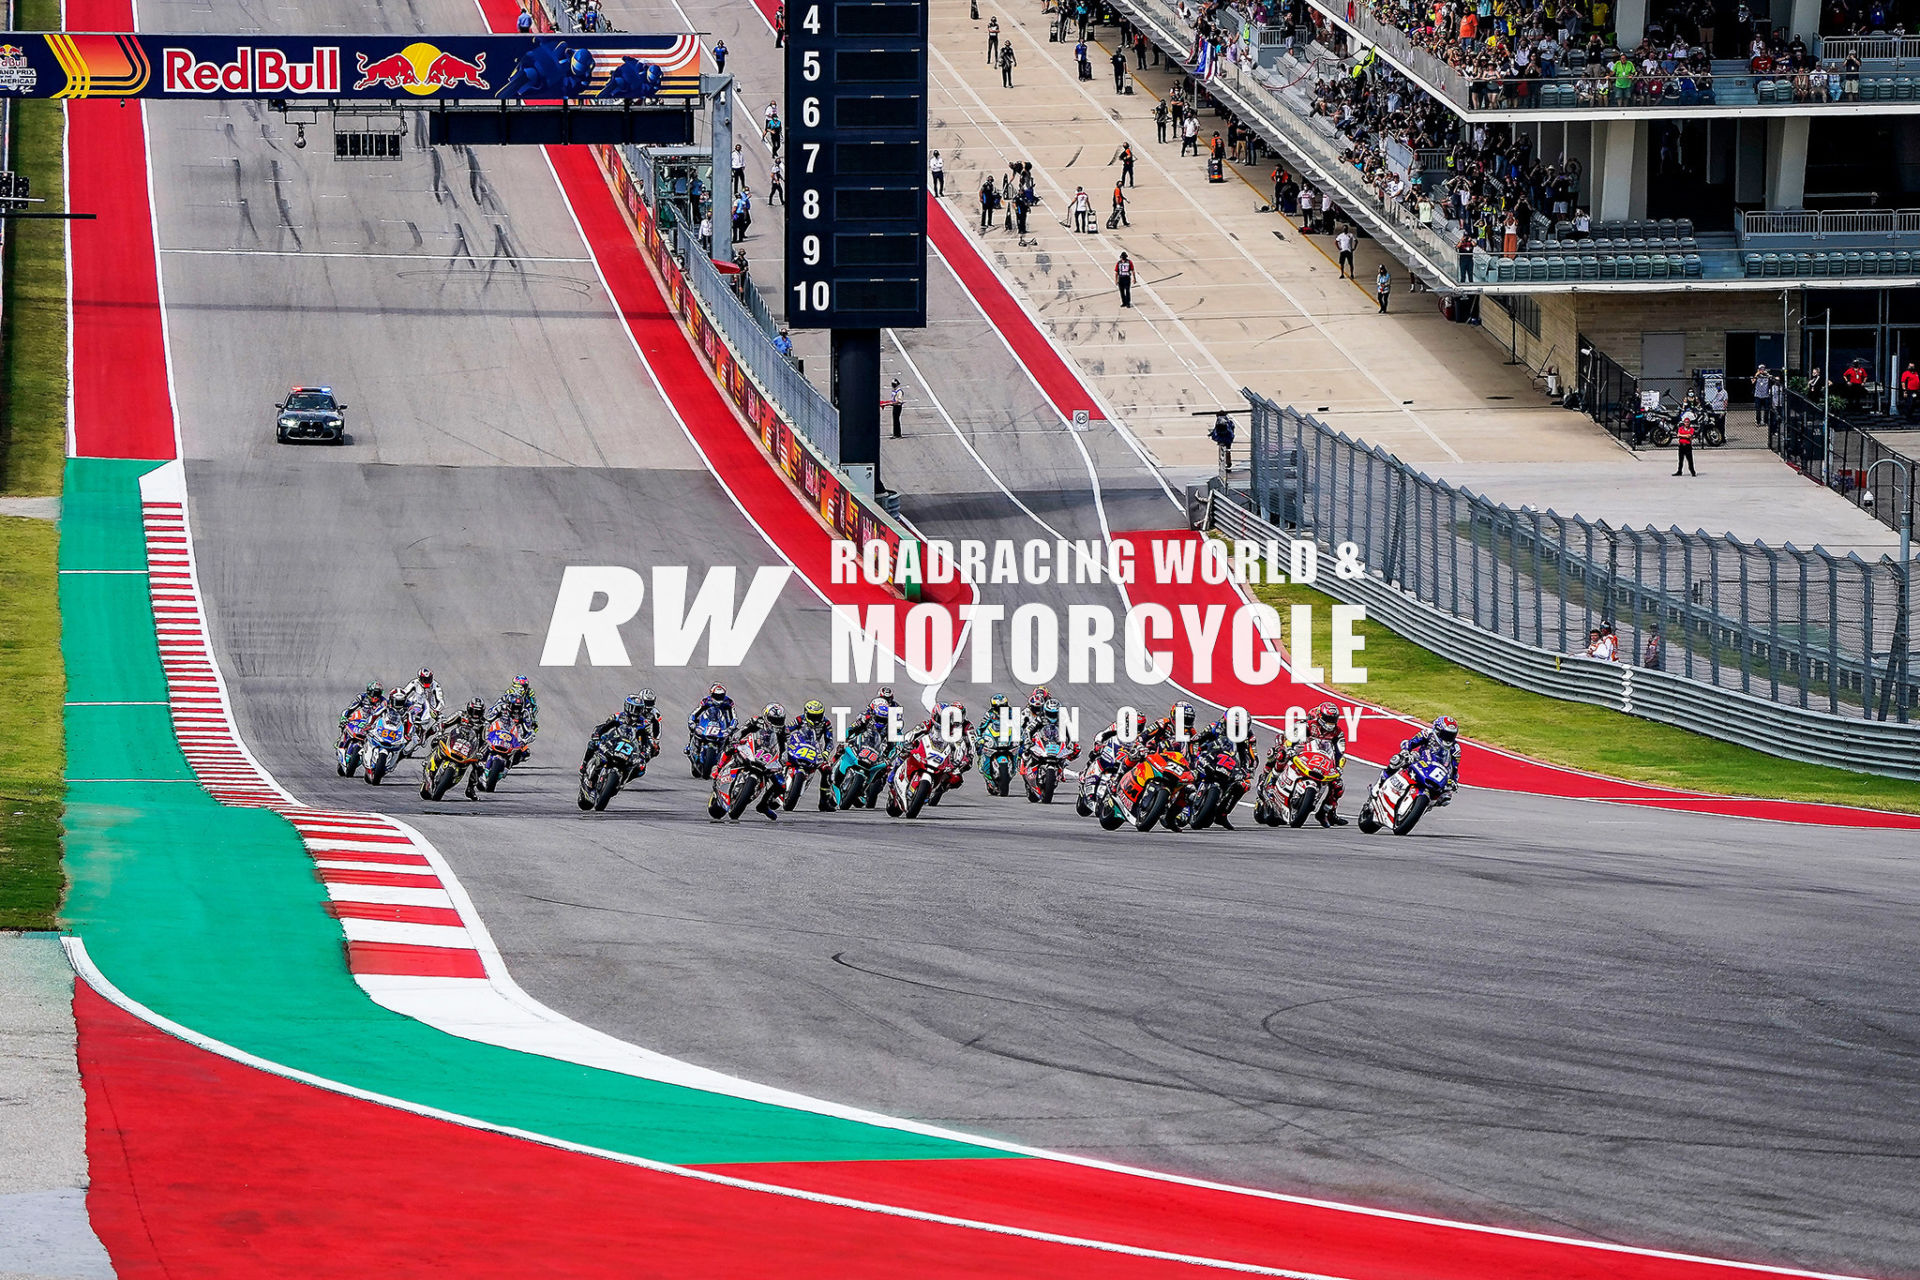 American Cam Beaubier (6) leads a field of Triumph 765 Triple-powered Moto2 racebikes into Turn 1 at Circuit Of The Americas (COTA) in 2021. Like most of the field, Beaubier’s racebike has a Kalex chassis carrying its spec three-cylinder engine. Photo by DPPI Media.